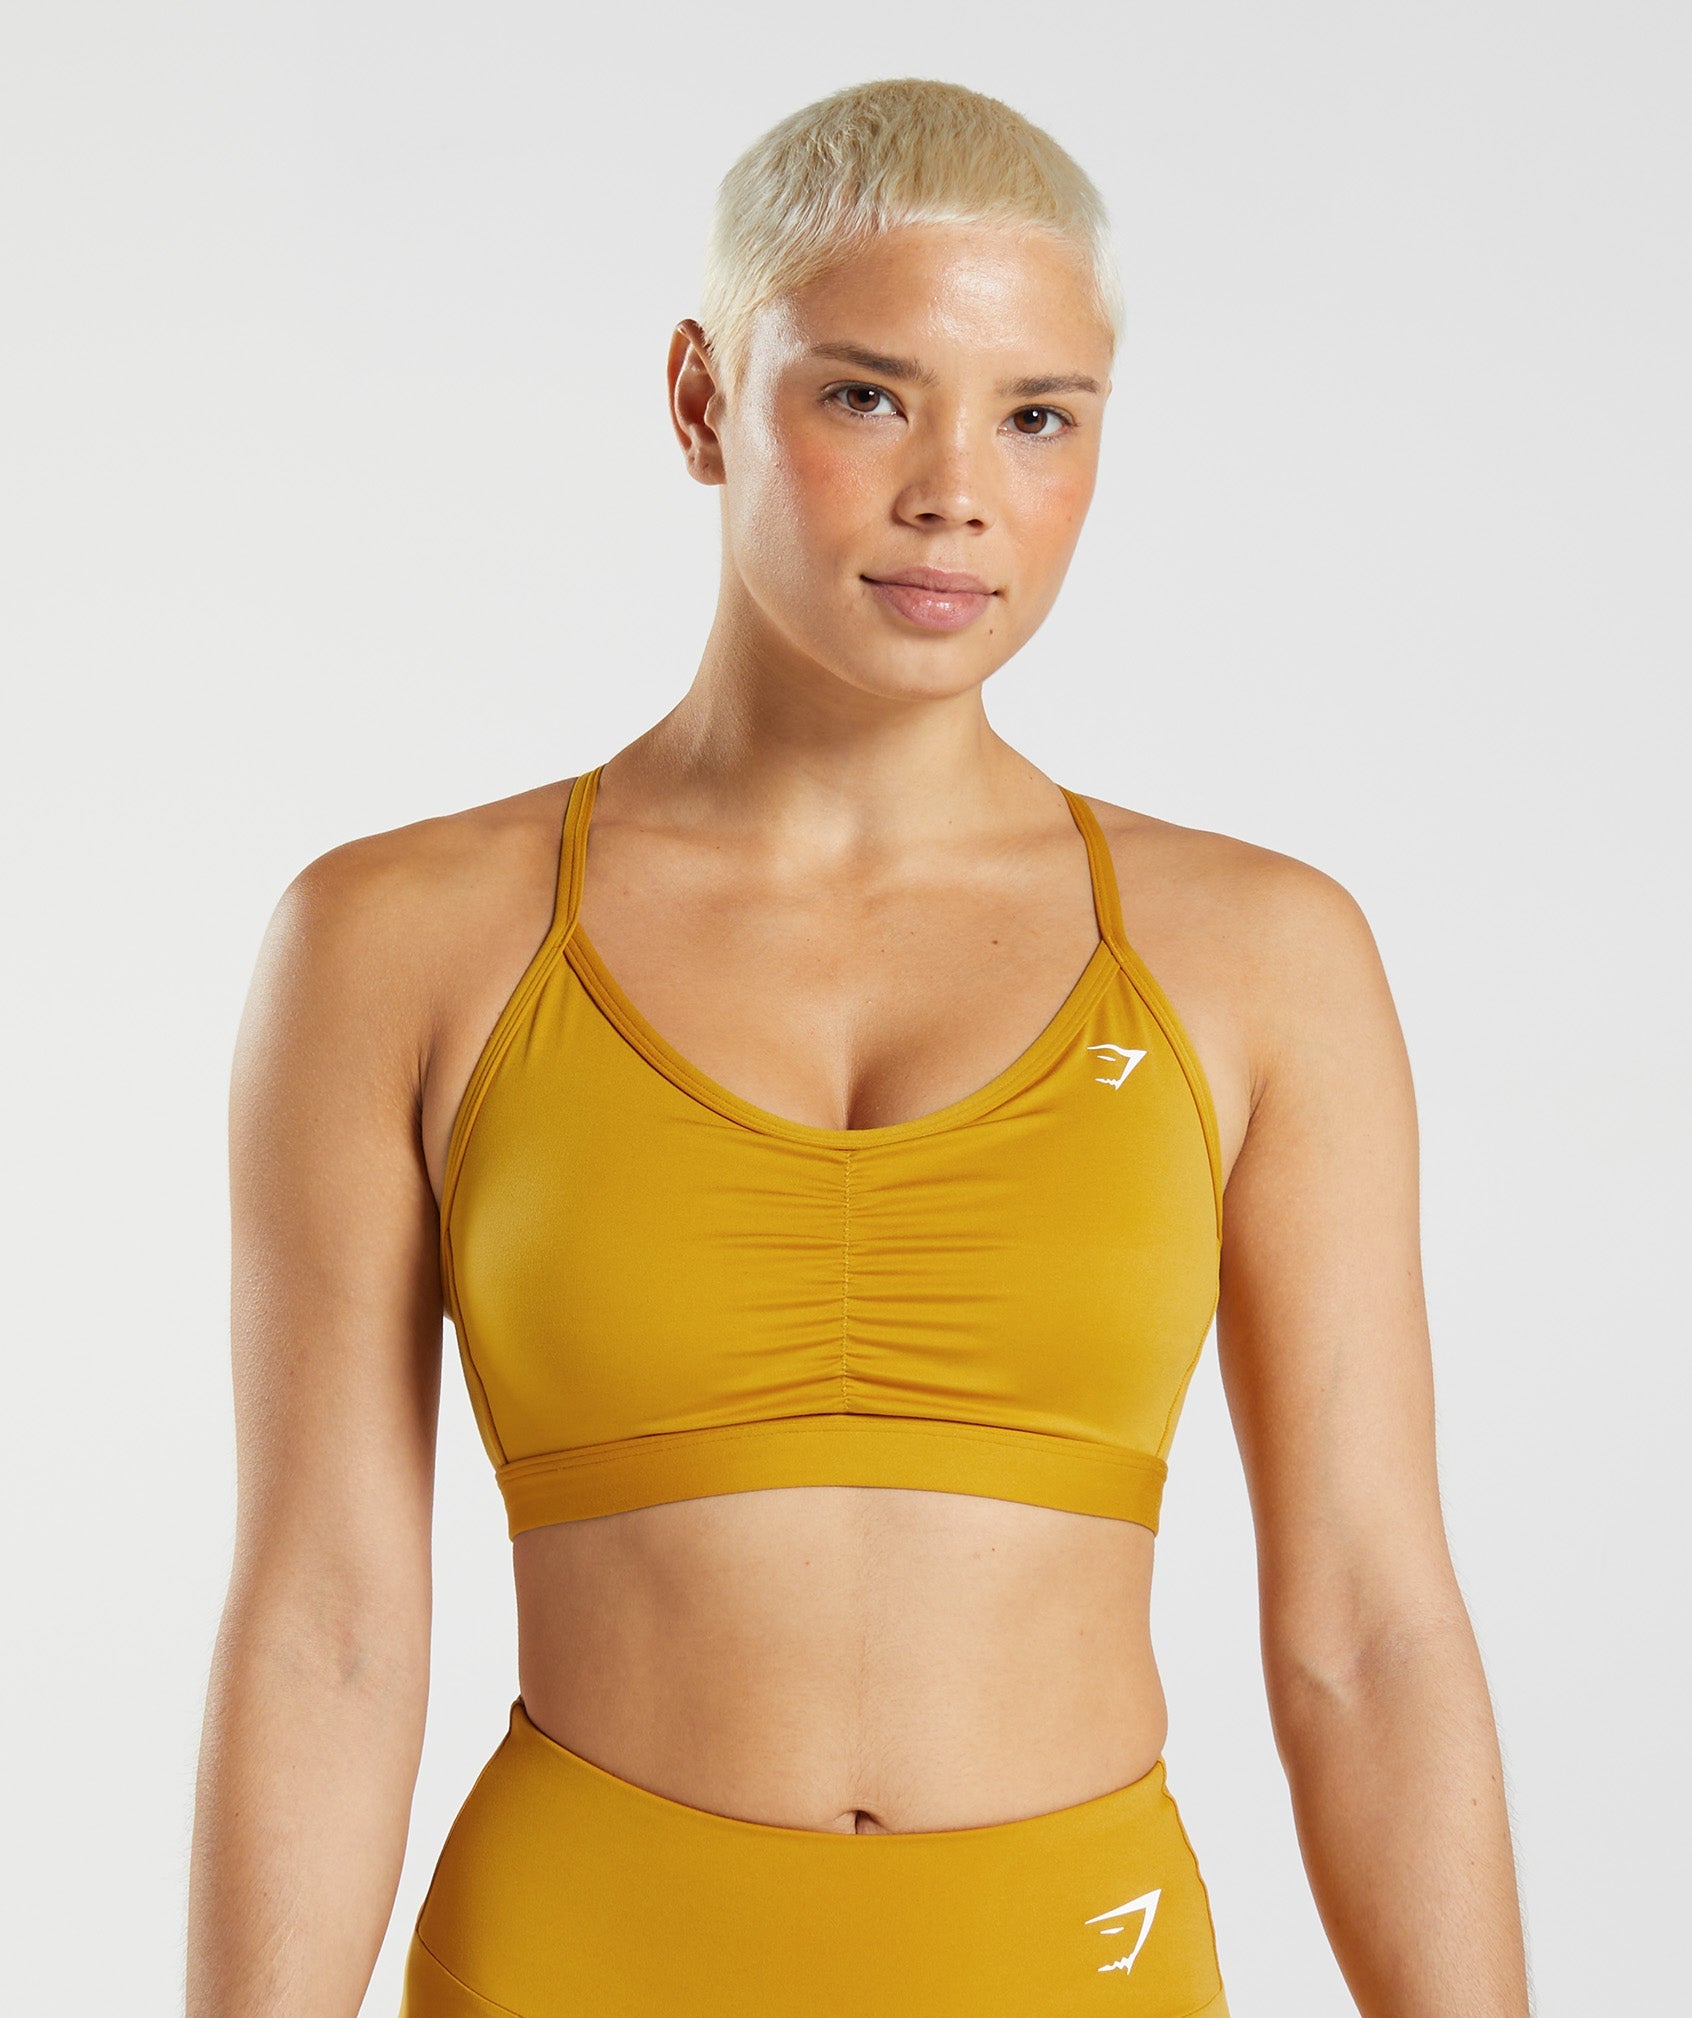 BN Gymshark Essential Tee Yellow L, Women's Fashion, Activewear on